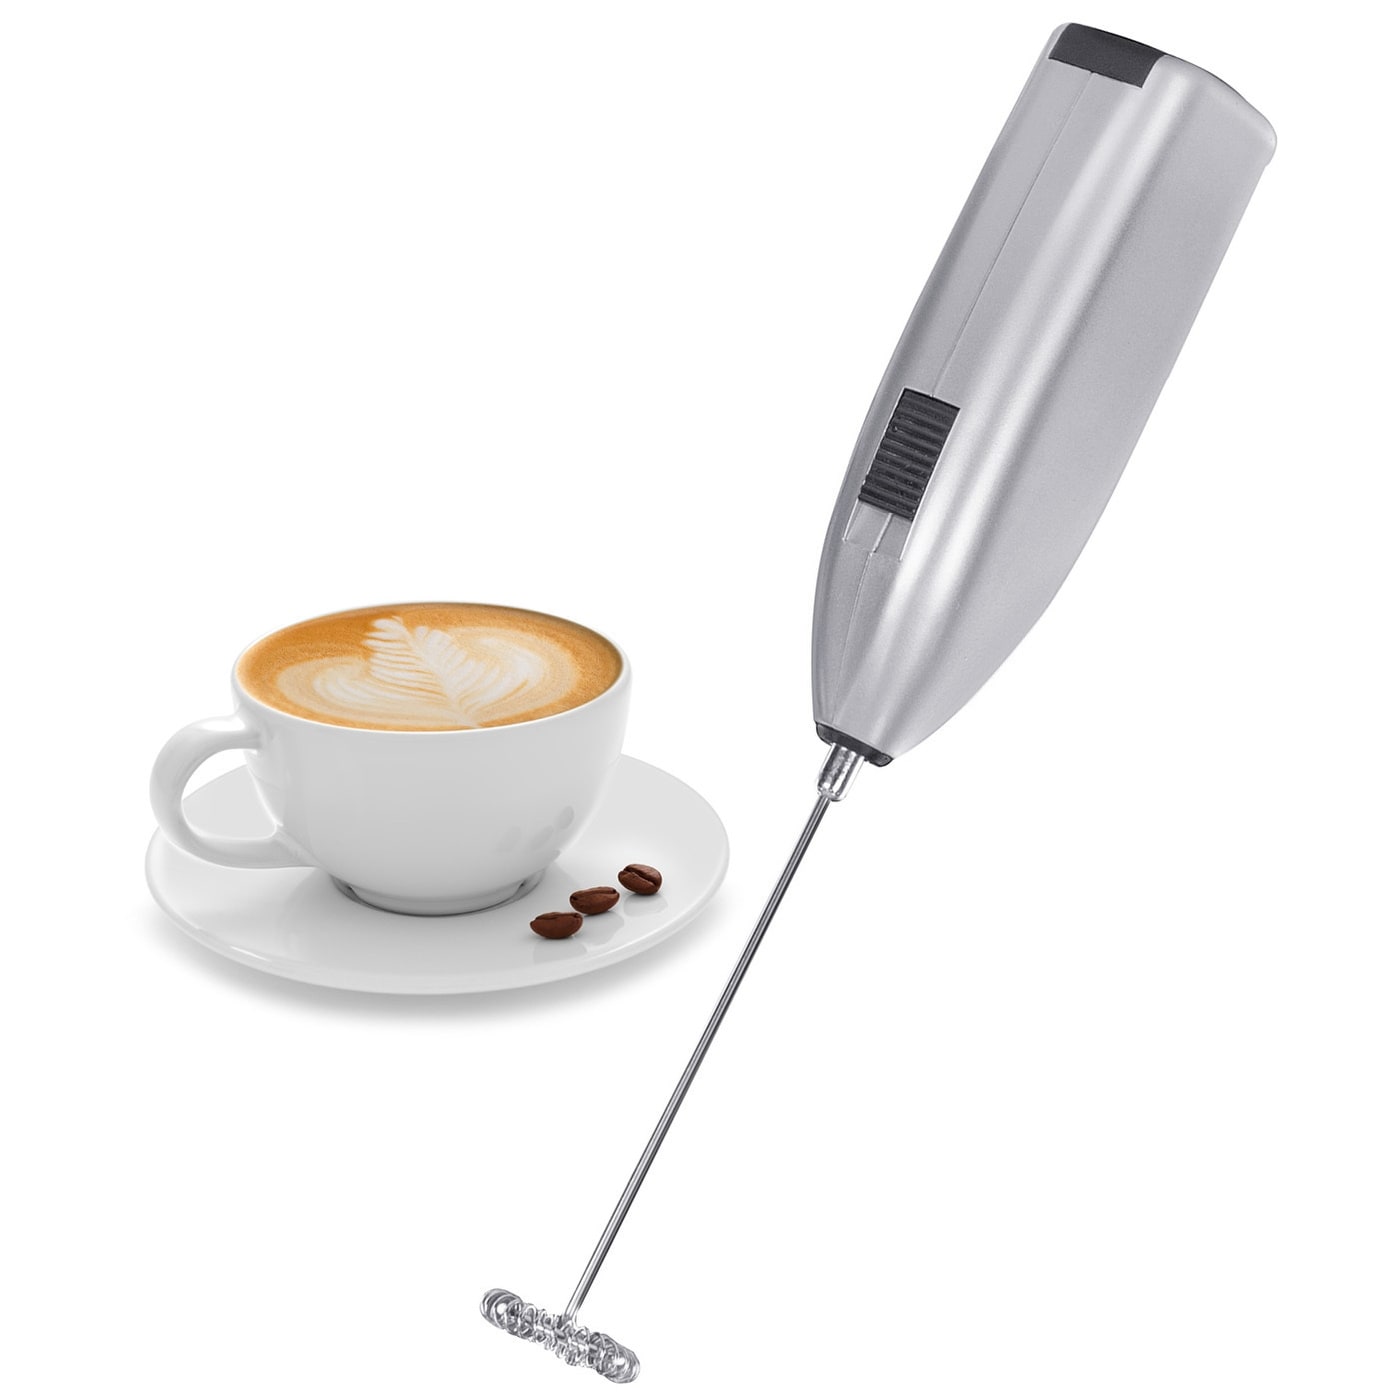 https://ak1.ostkcdn.com/images/products/is/images/direct/7f4912b90d53c9bb062092f52705e1cabc7fba9e/Knox-Gear-Handheld-Milk-Frother.jpg